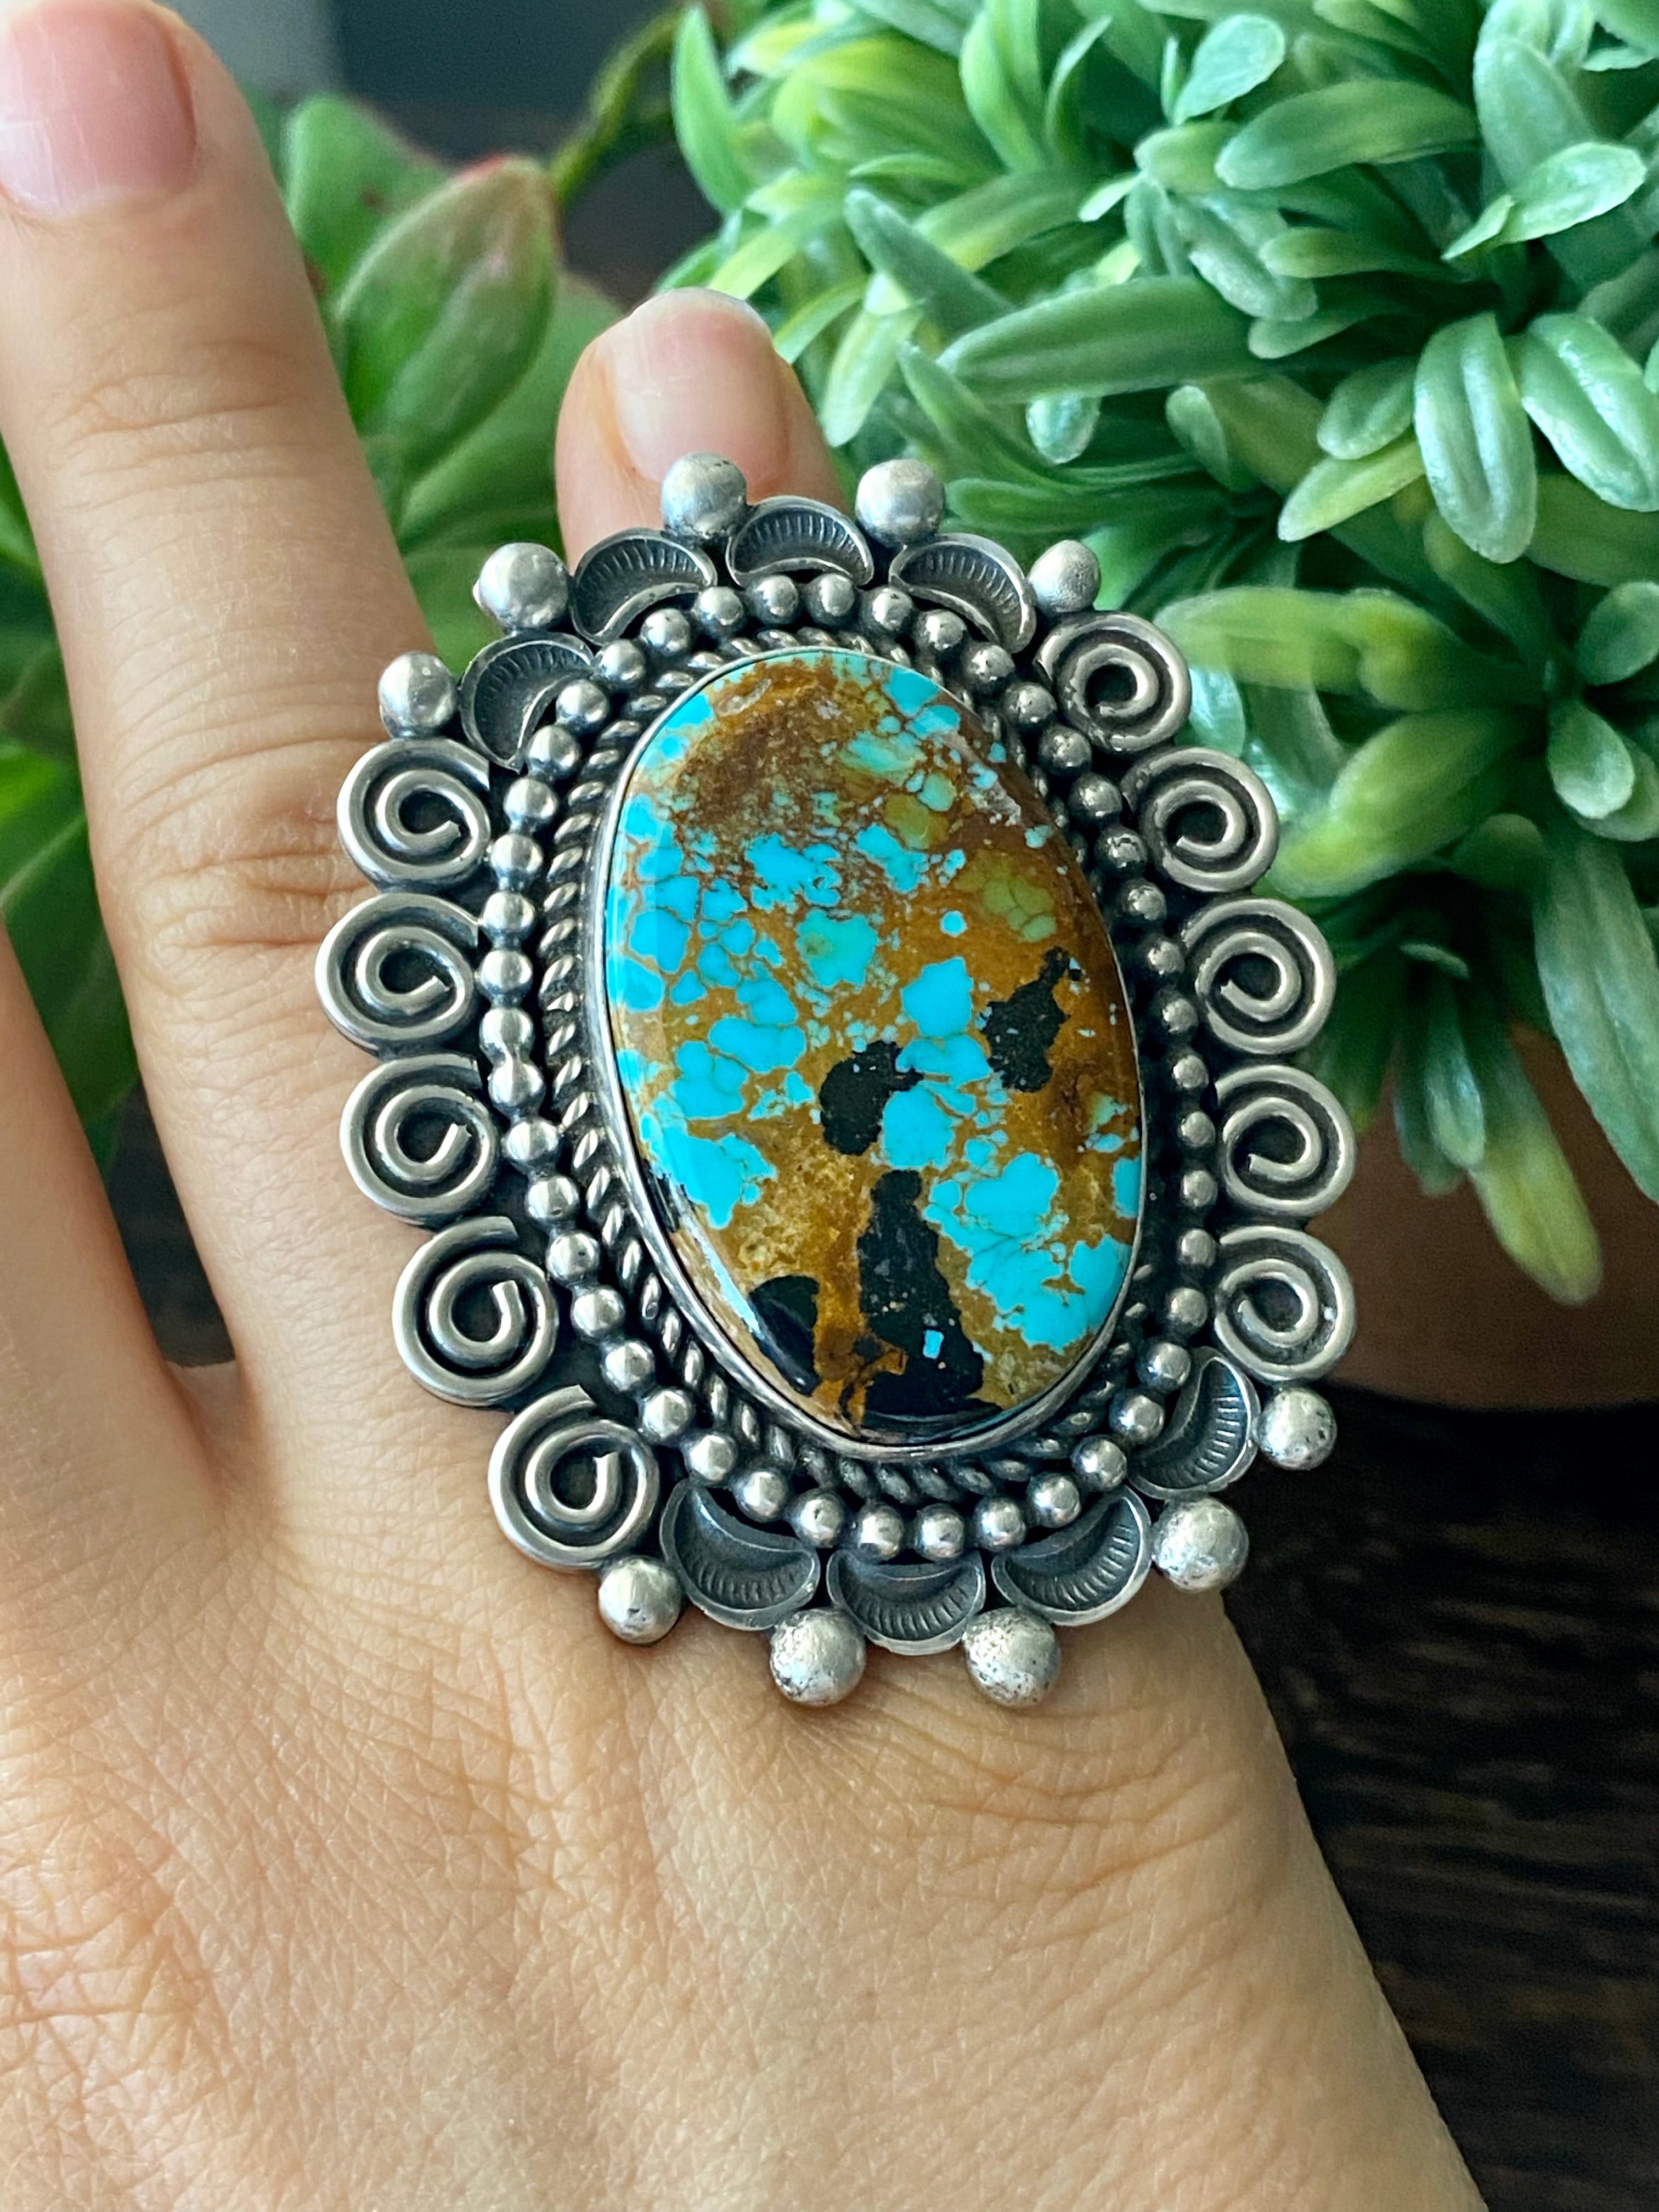 Alex Sanchez Kings Manassa Turquoise & Sterling Silver Ring Size 5.5